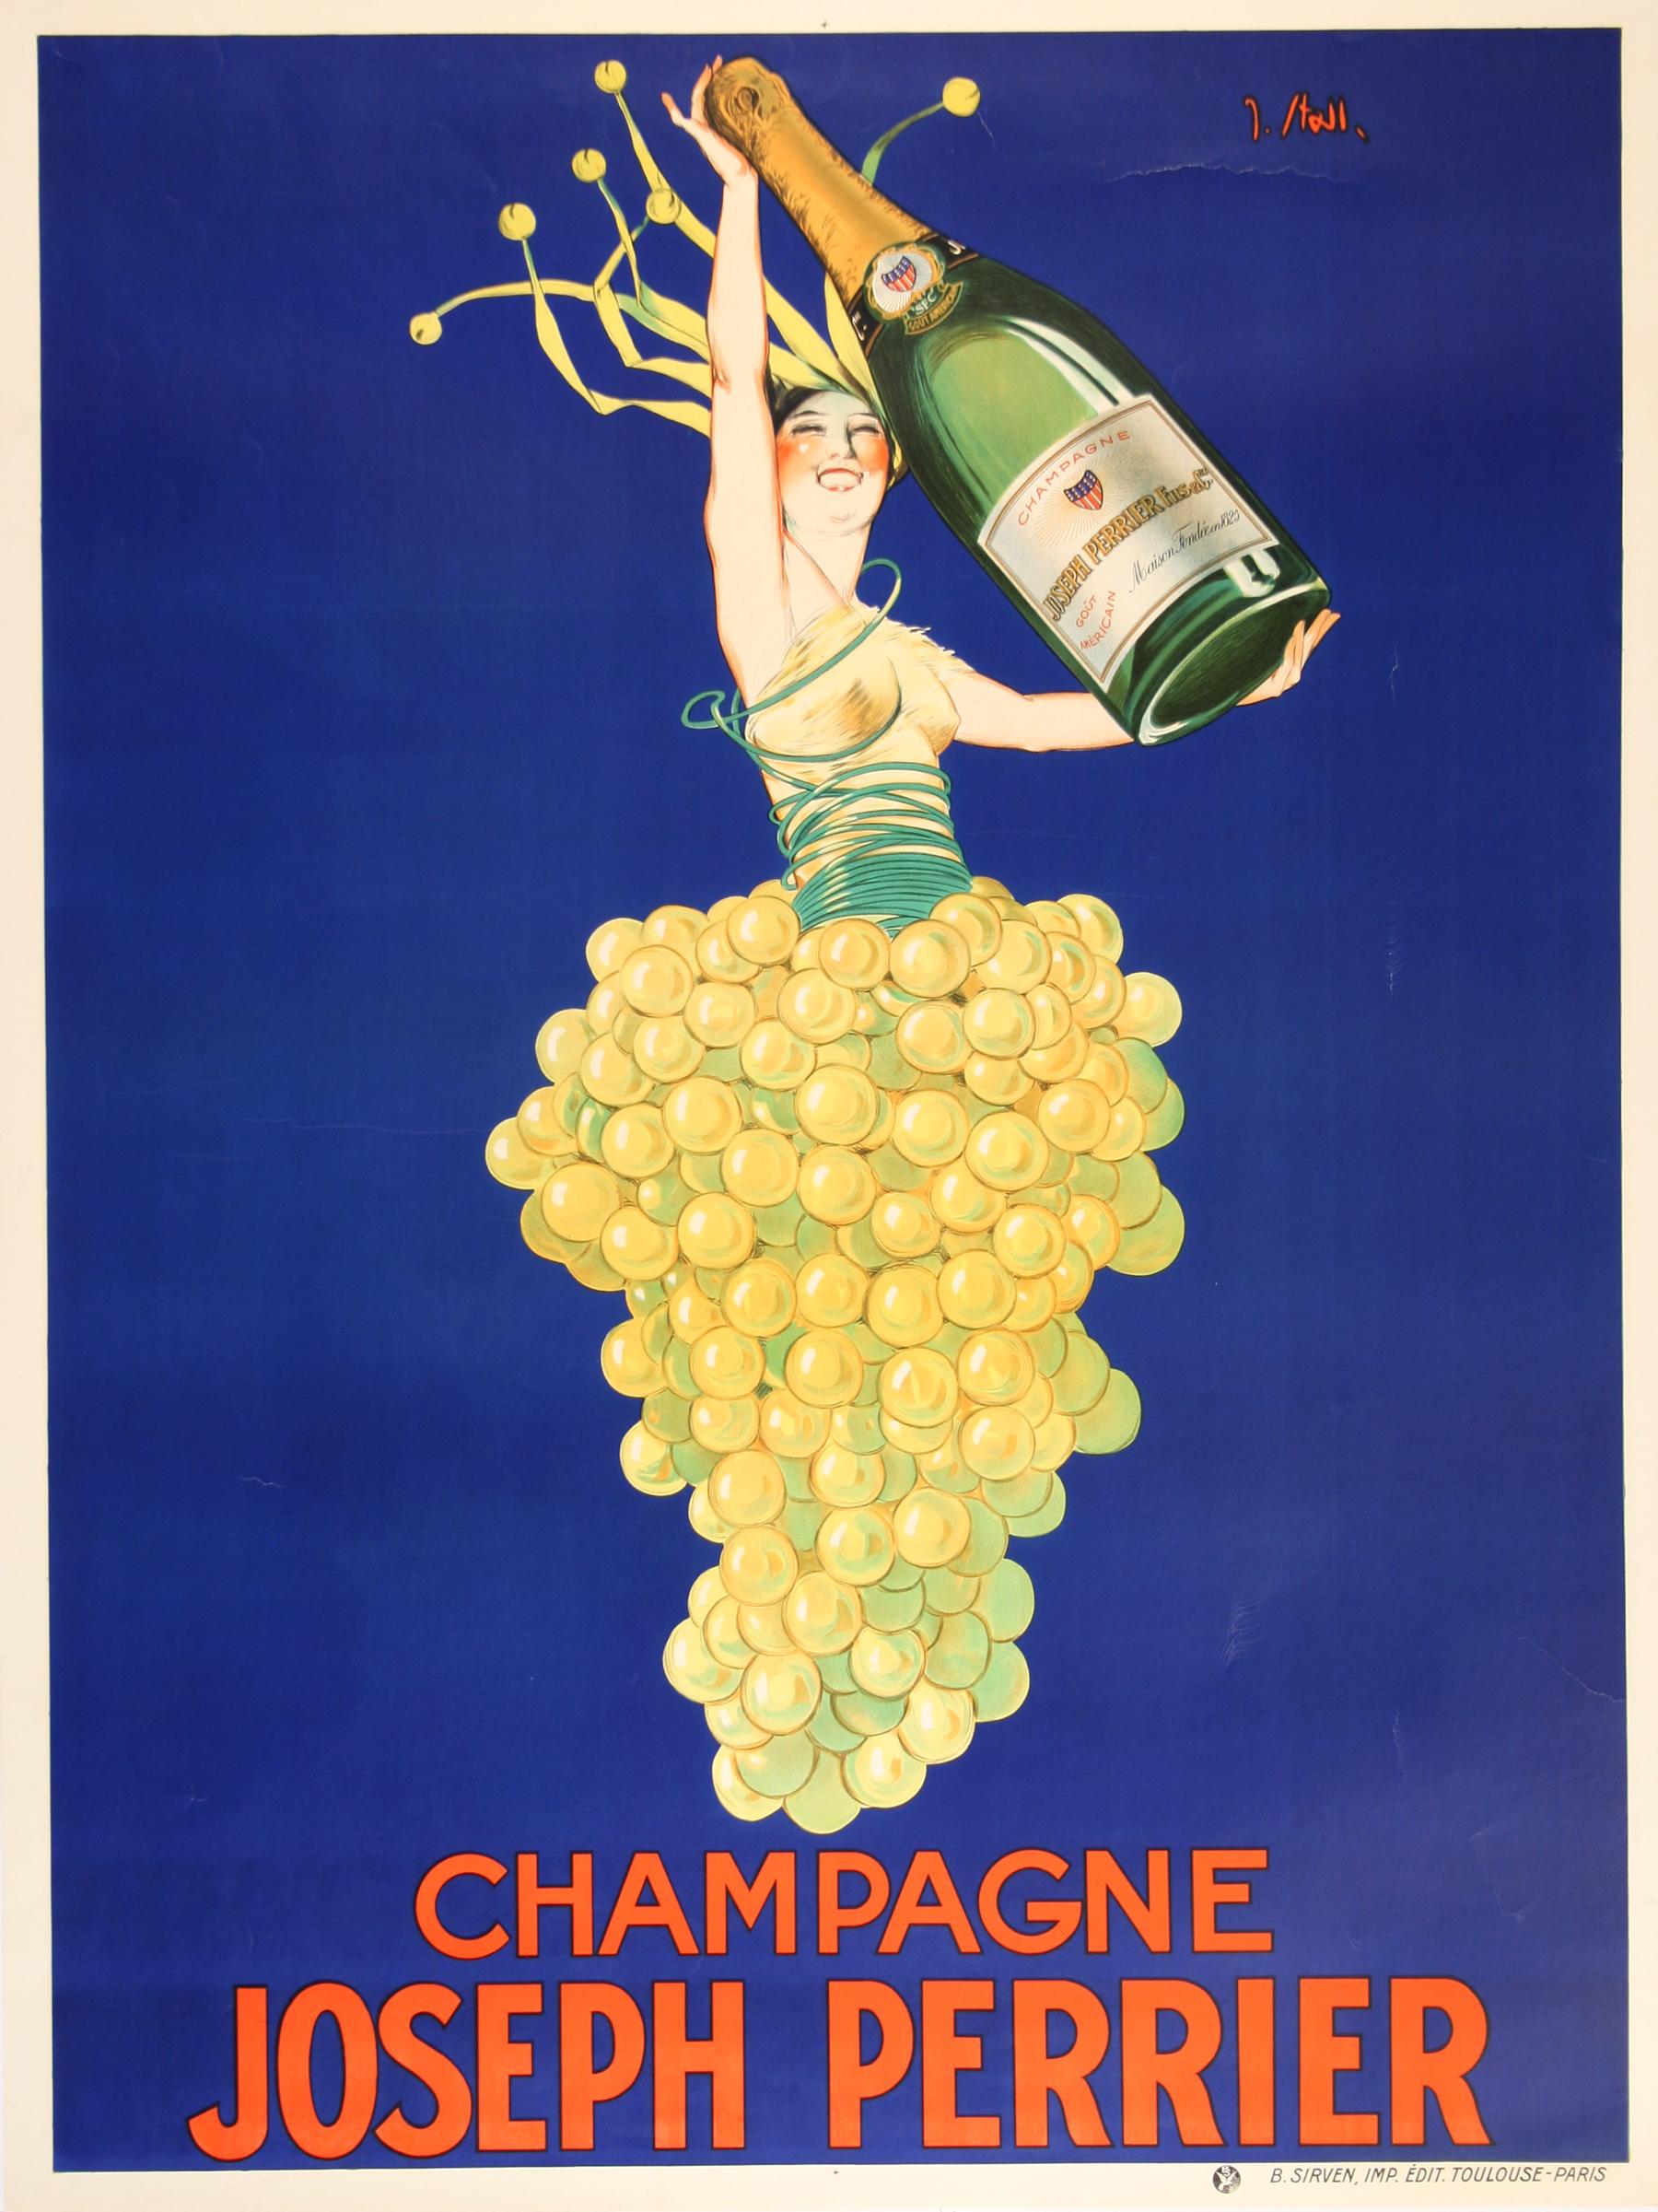 Champagne Joseph Perrier Poster by Stall 1930's Original Vintage French Liquor - Print by Joseph Stall